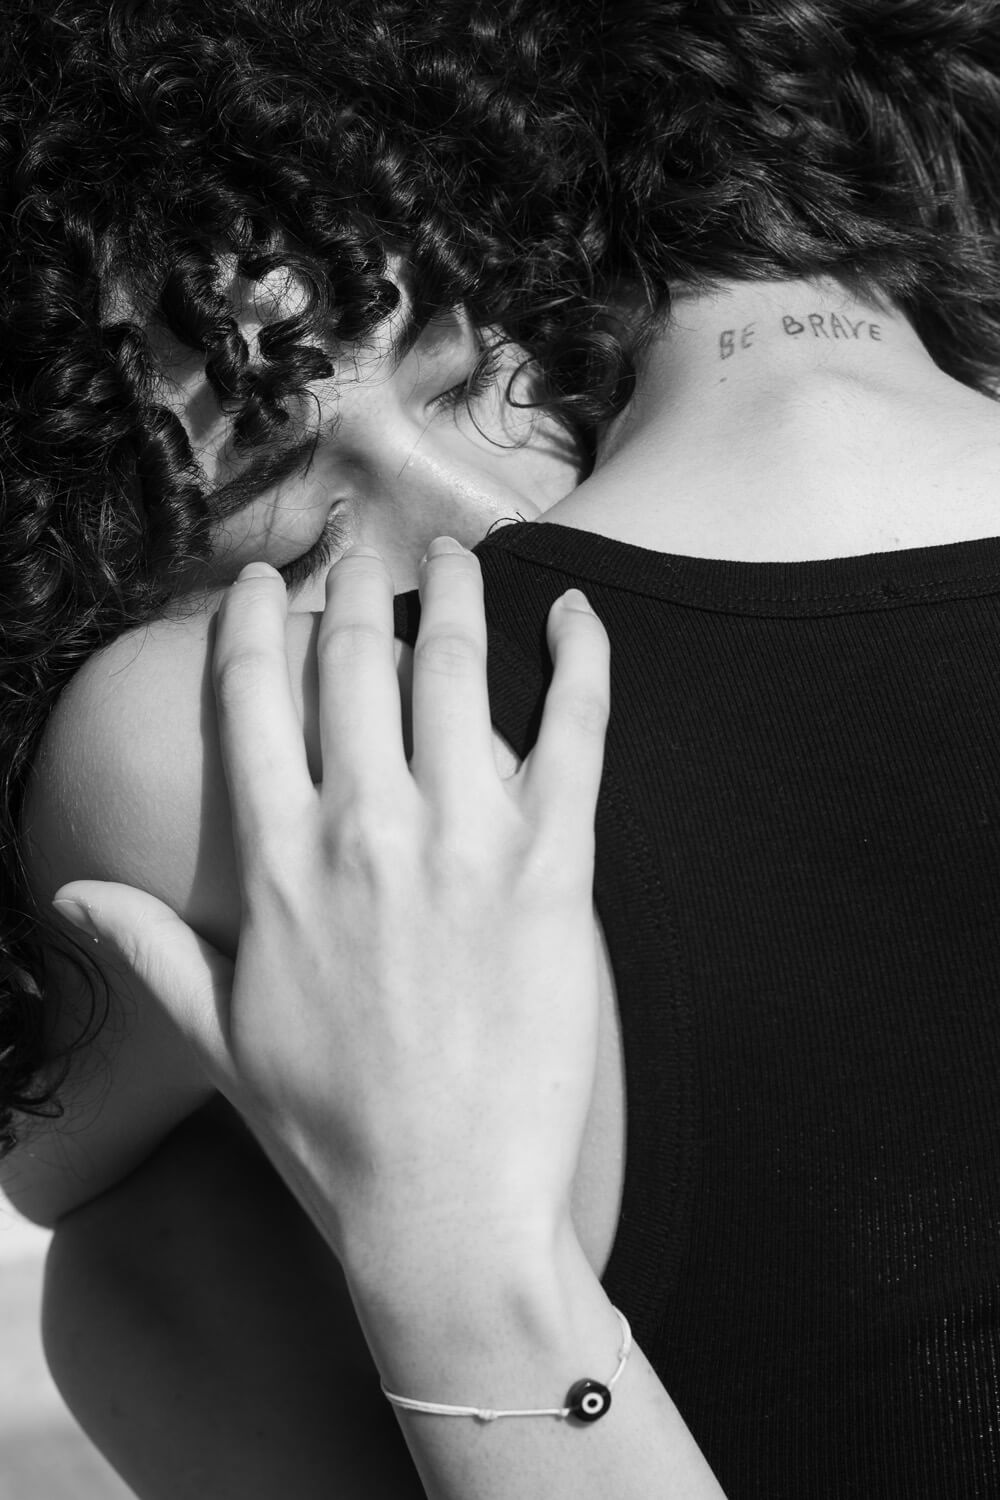 Two individuals in a close embrace, one with curly hair and a tattoo on their neck that reads 